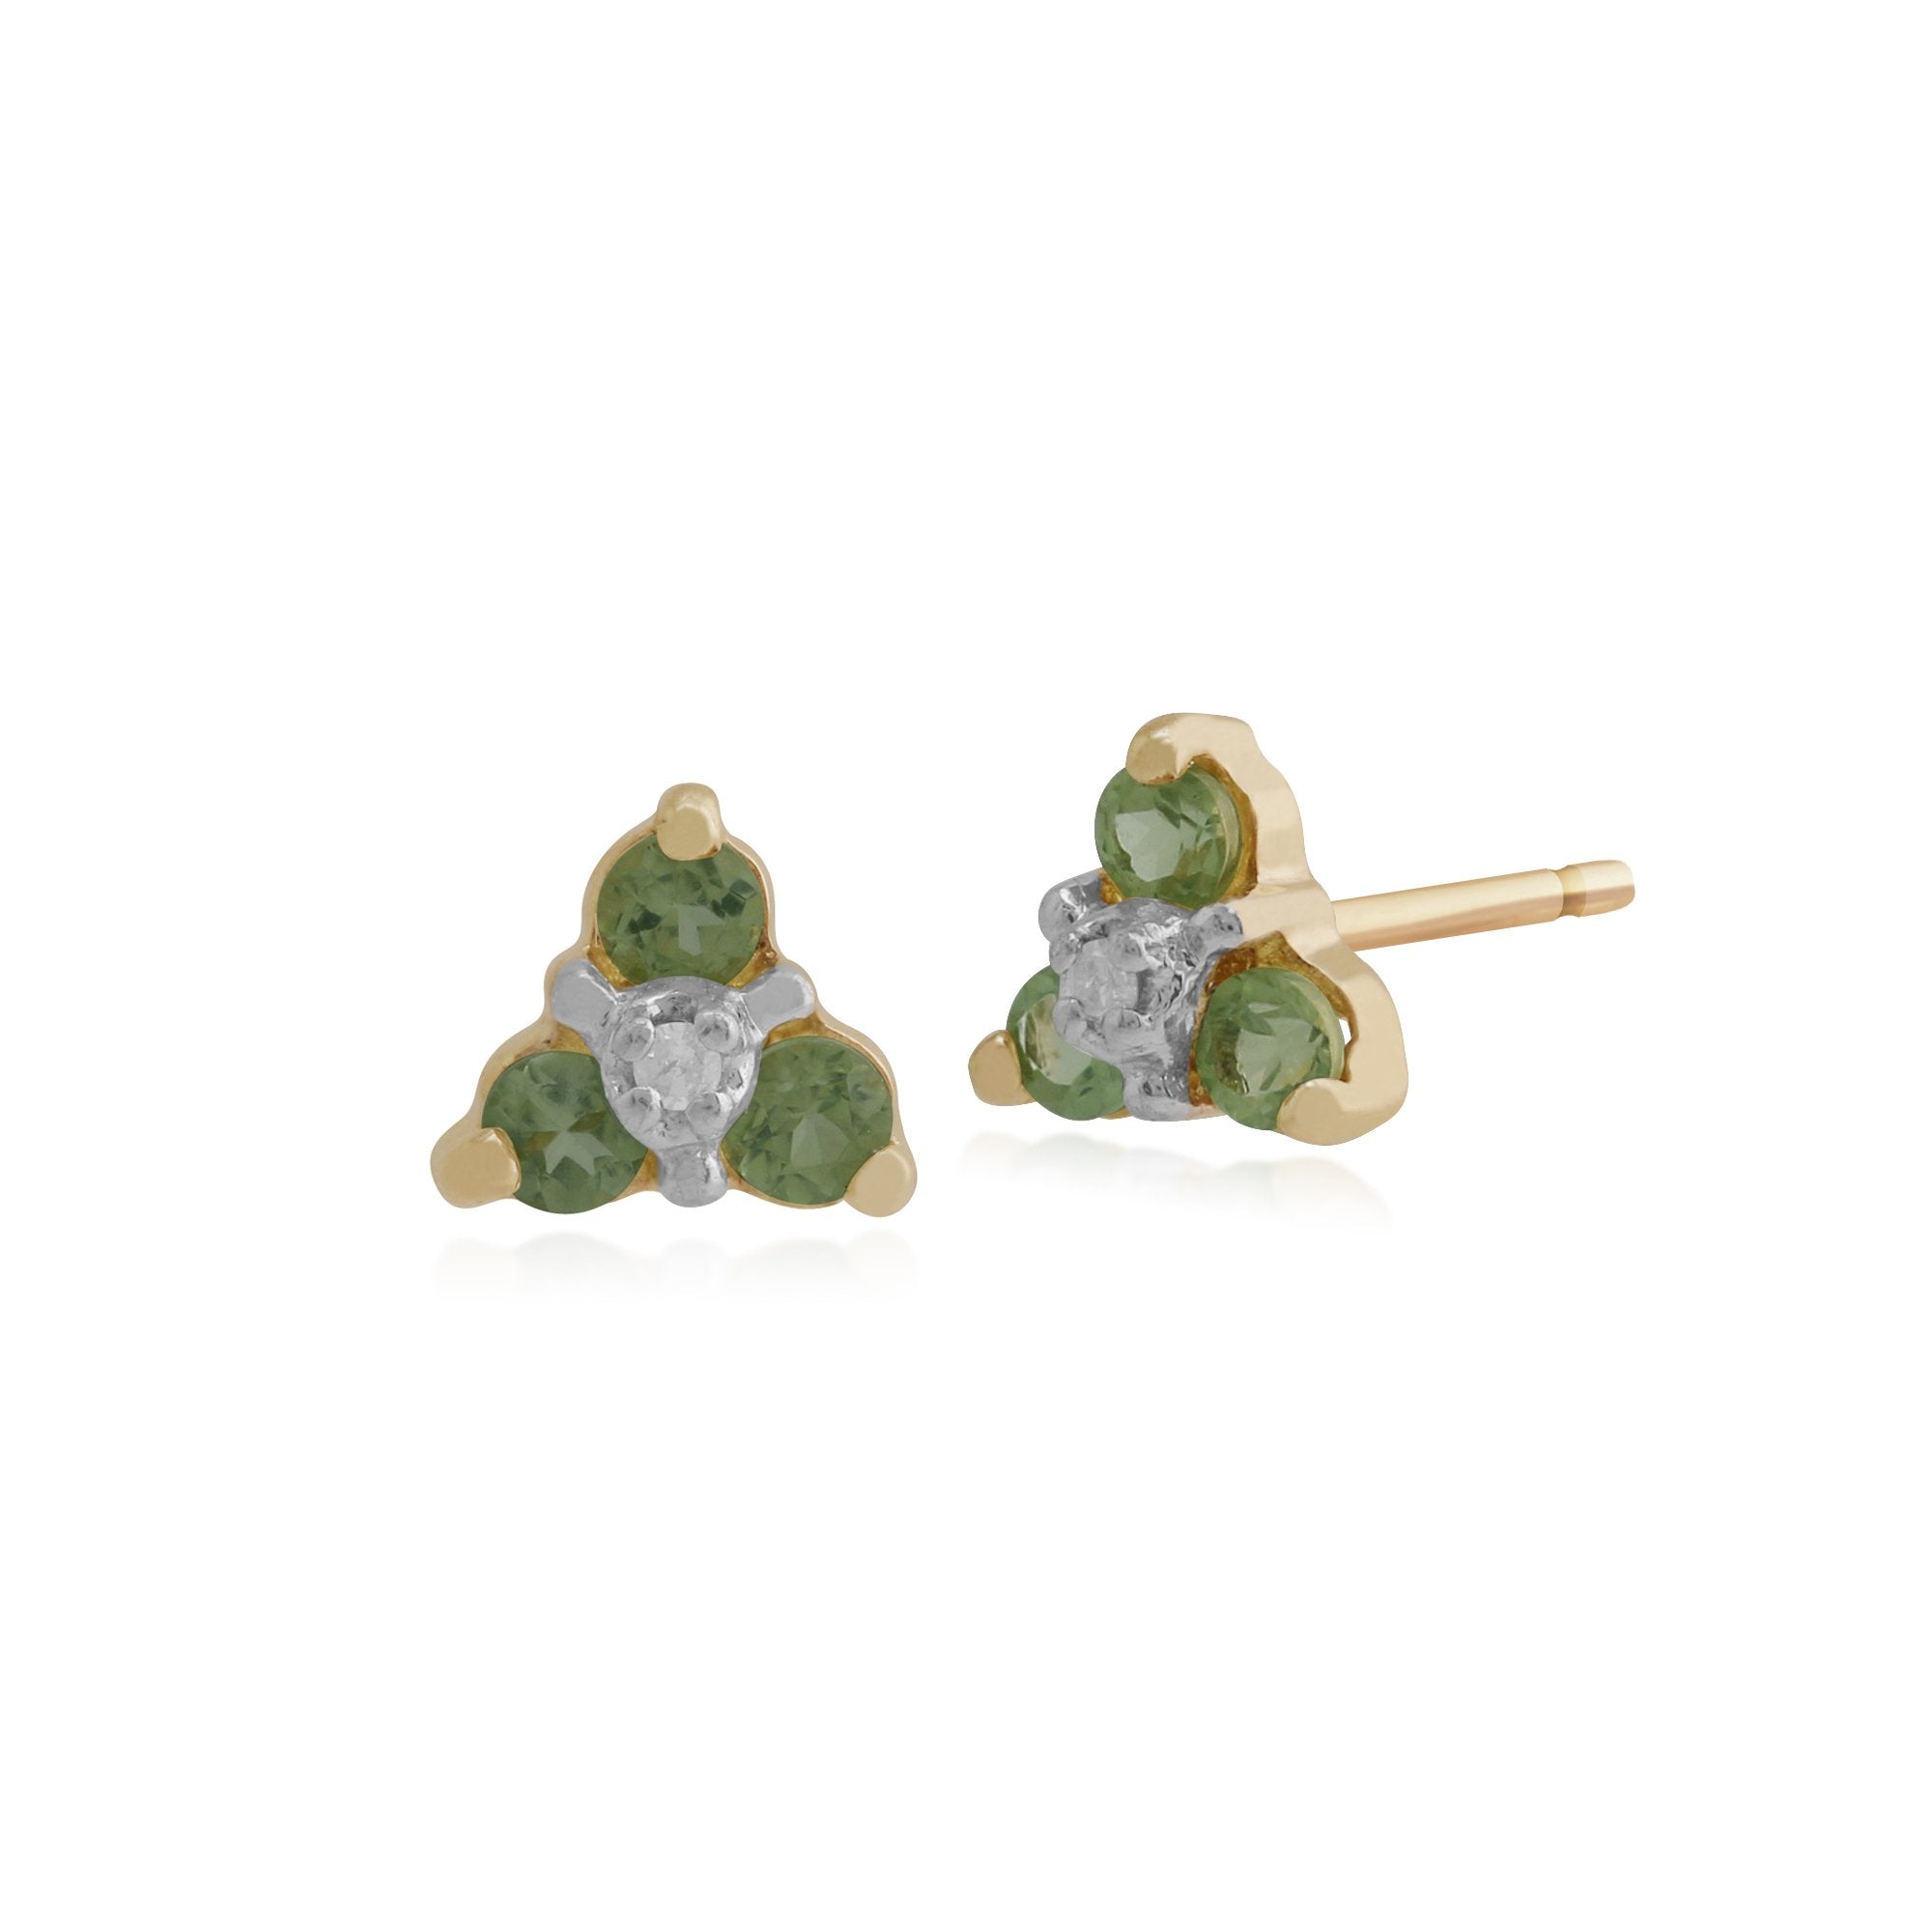 Floral Round Peridot & Diamond Stud Earrings in 9ct Yellow Gold